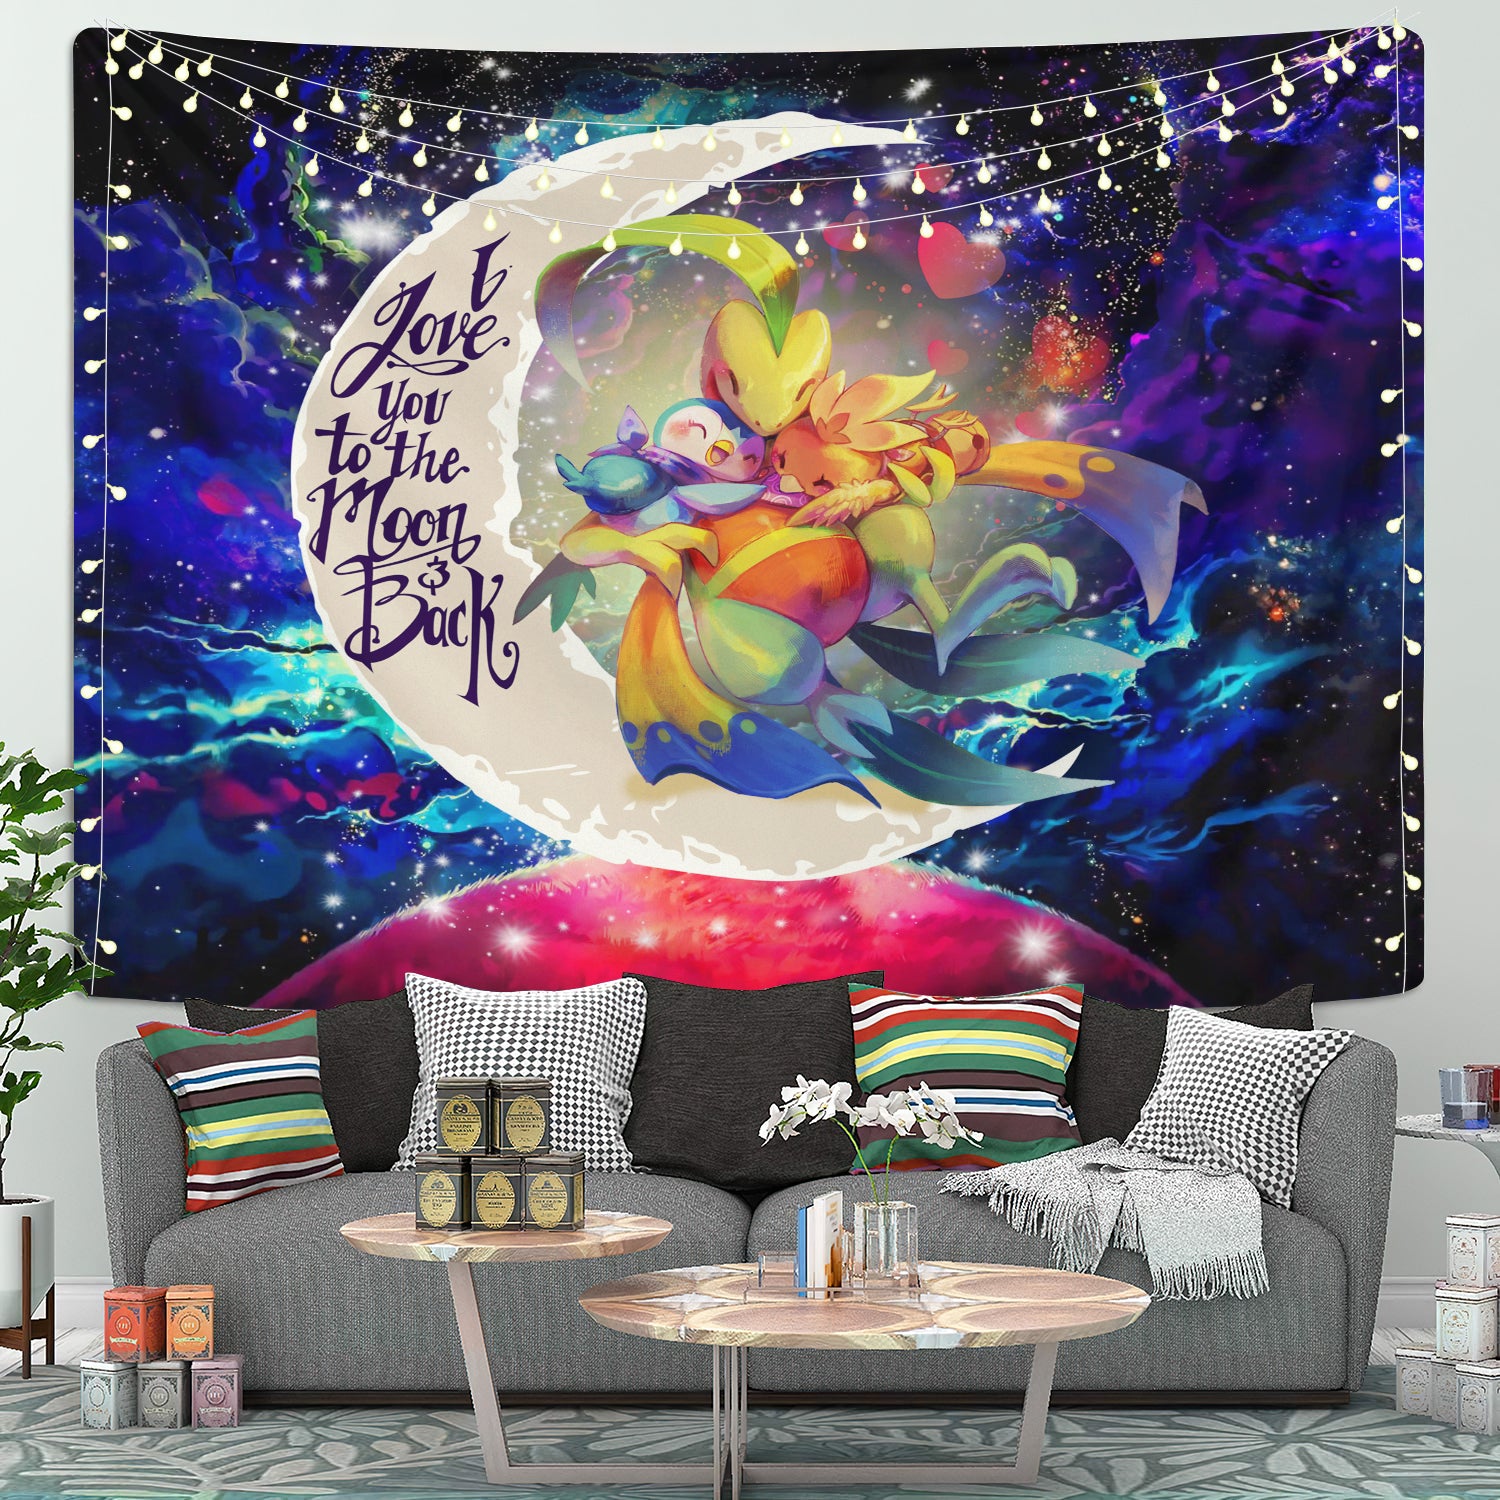 Torchic Grovyle Piplup Pokemon Love You To The Moon Galaxy Tapestry Room Decor Nearkii